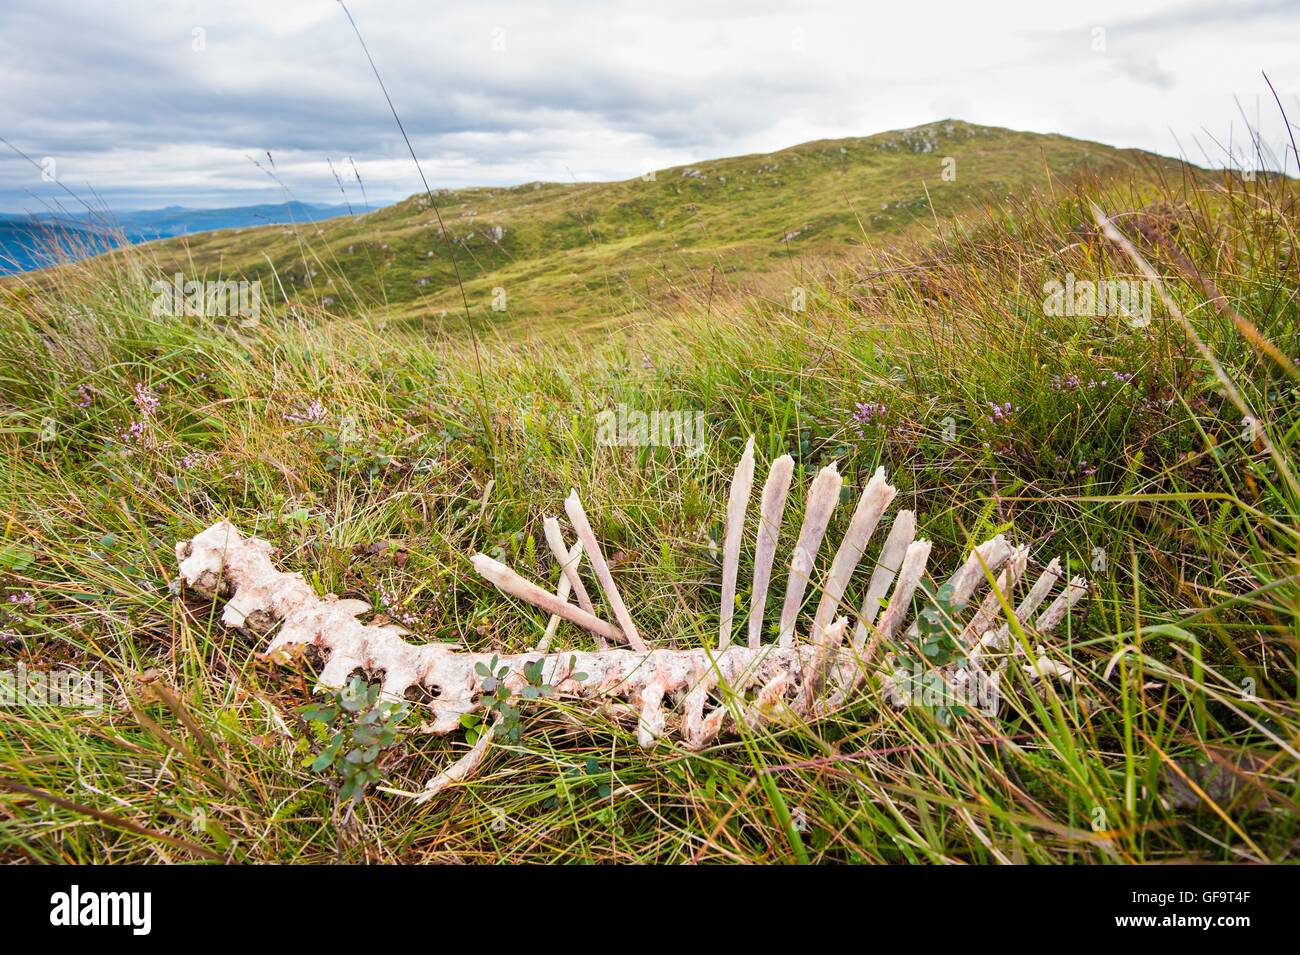 Remains from a dead animal in the mountains Stock Photo